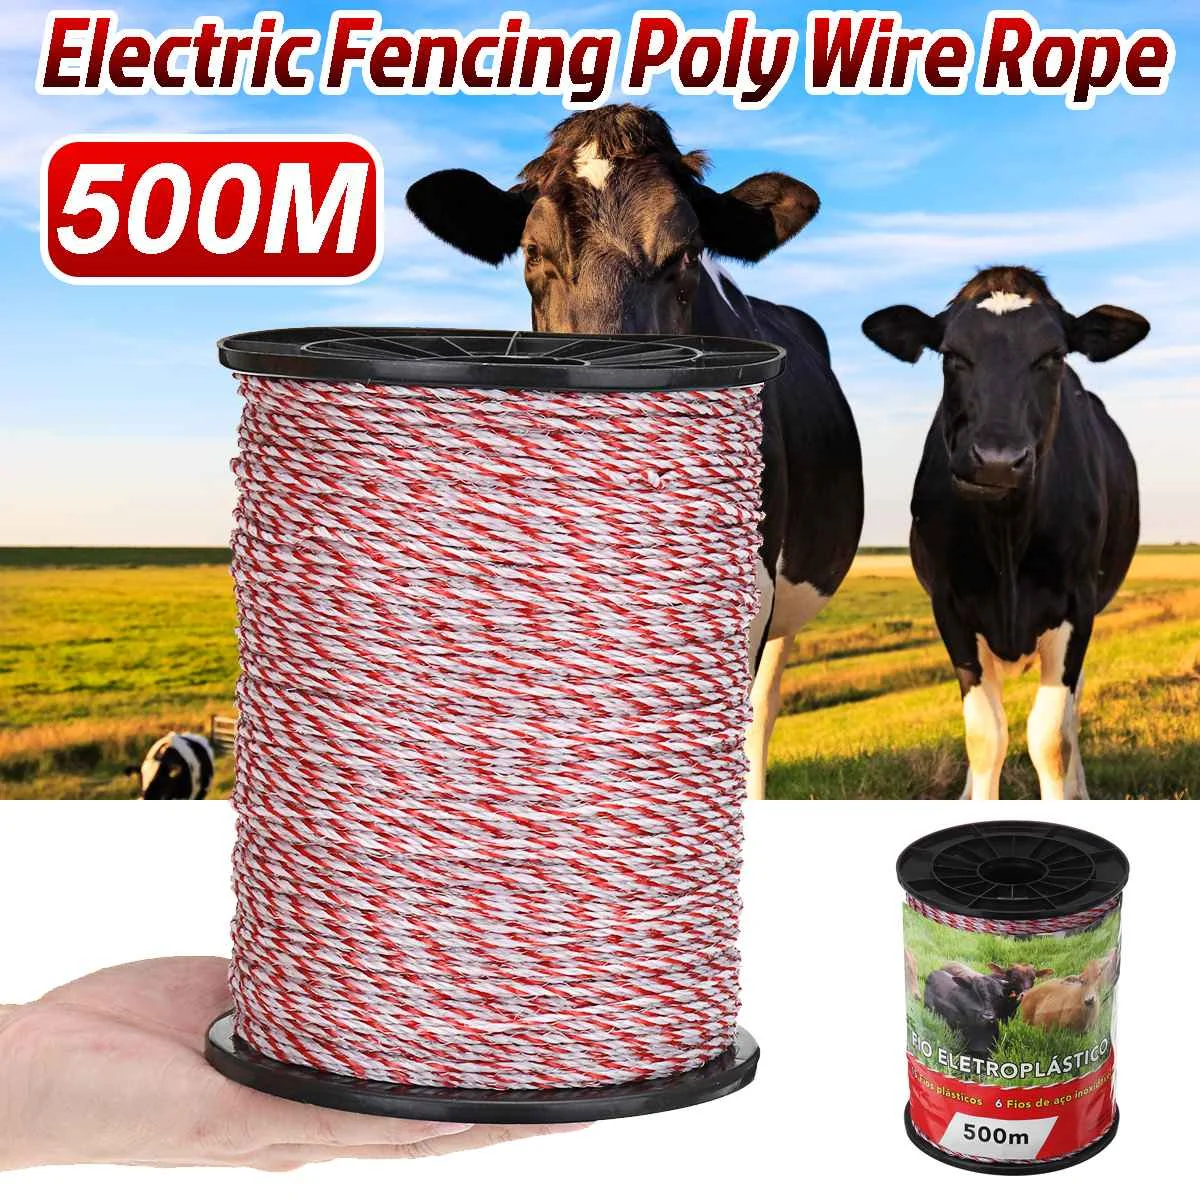 4 Rolls 500m x 2mm 3 Strand Electric Fence Polywire Poly Wire Fencing Energiser 